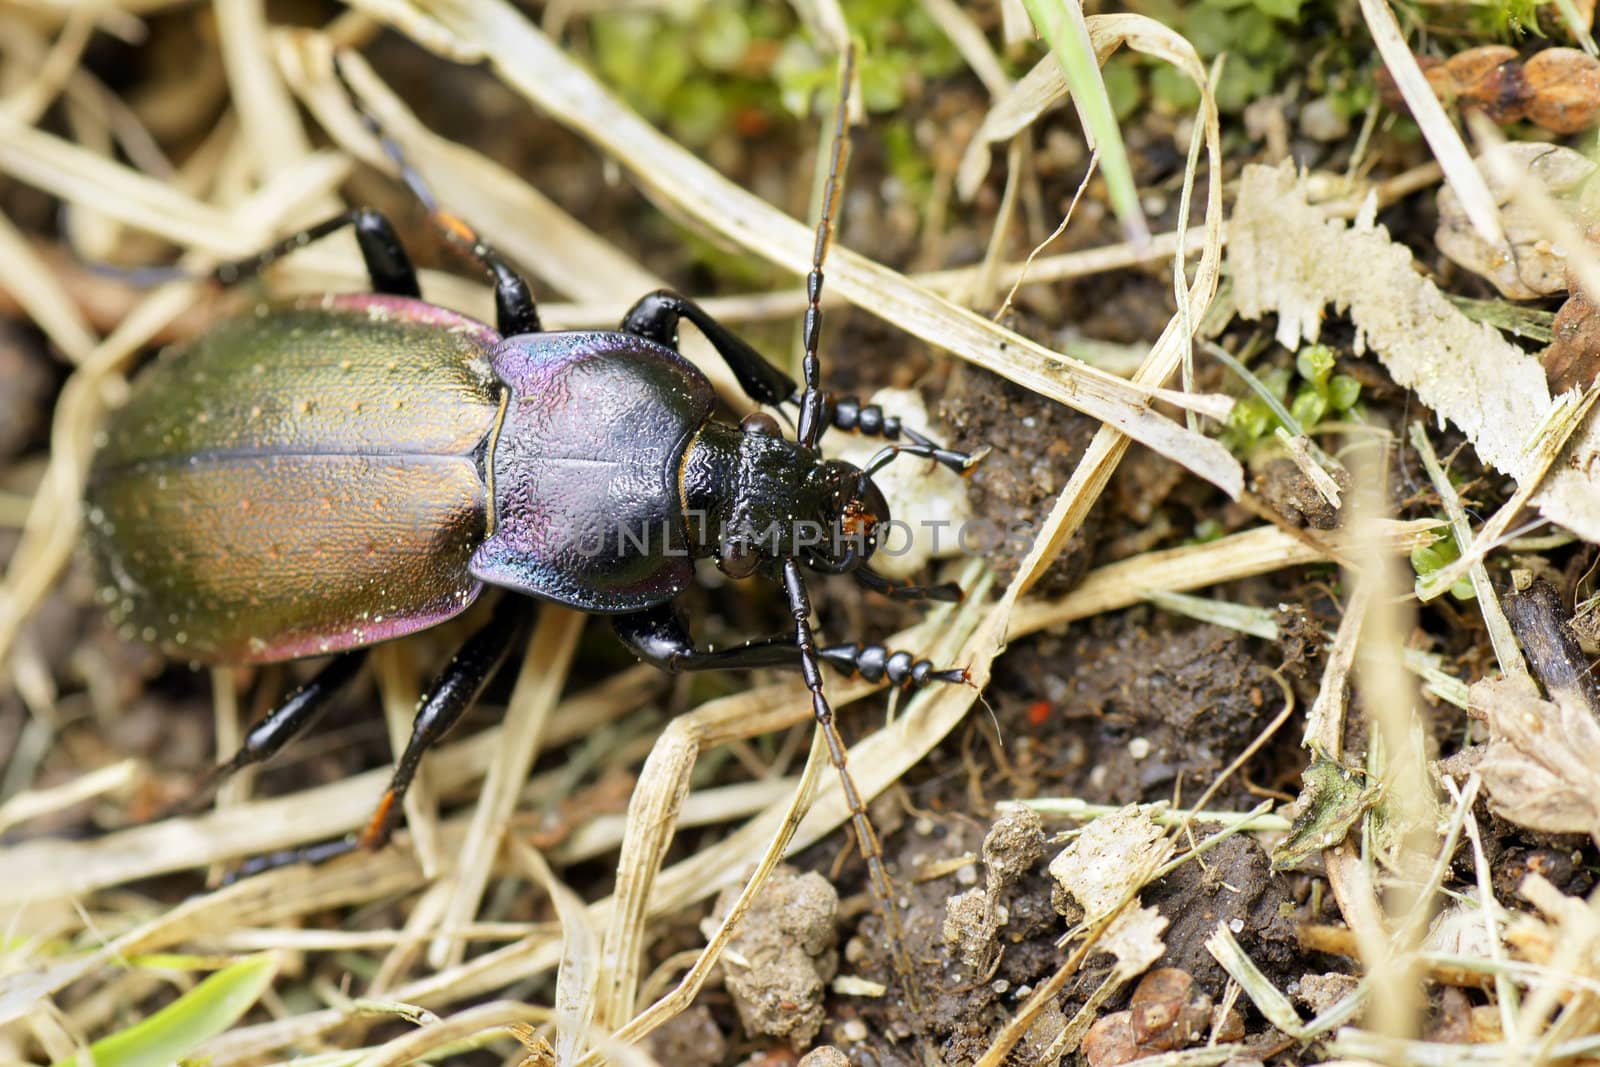 Purple-rimmed carabus beetle top view by Mirage3